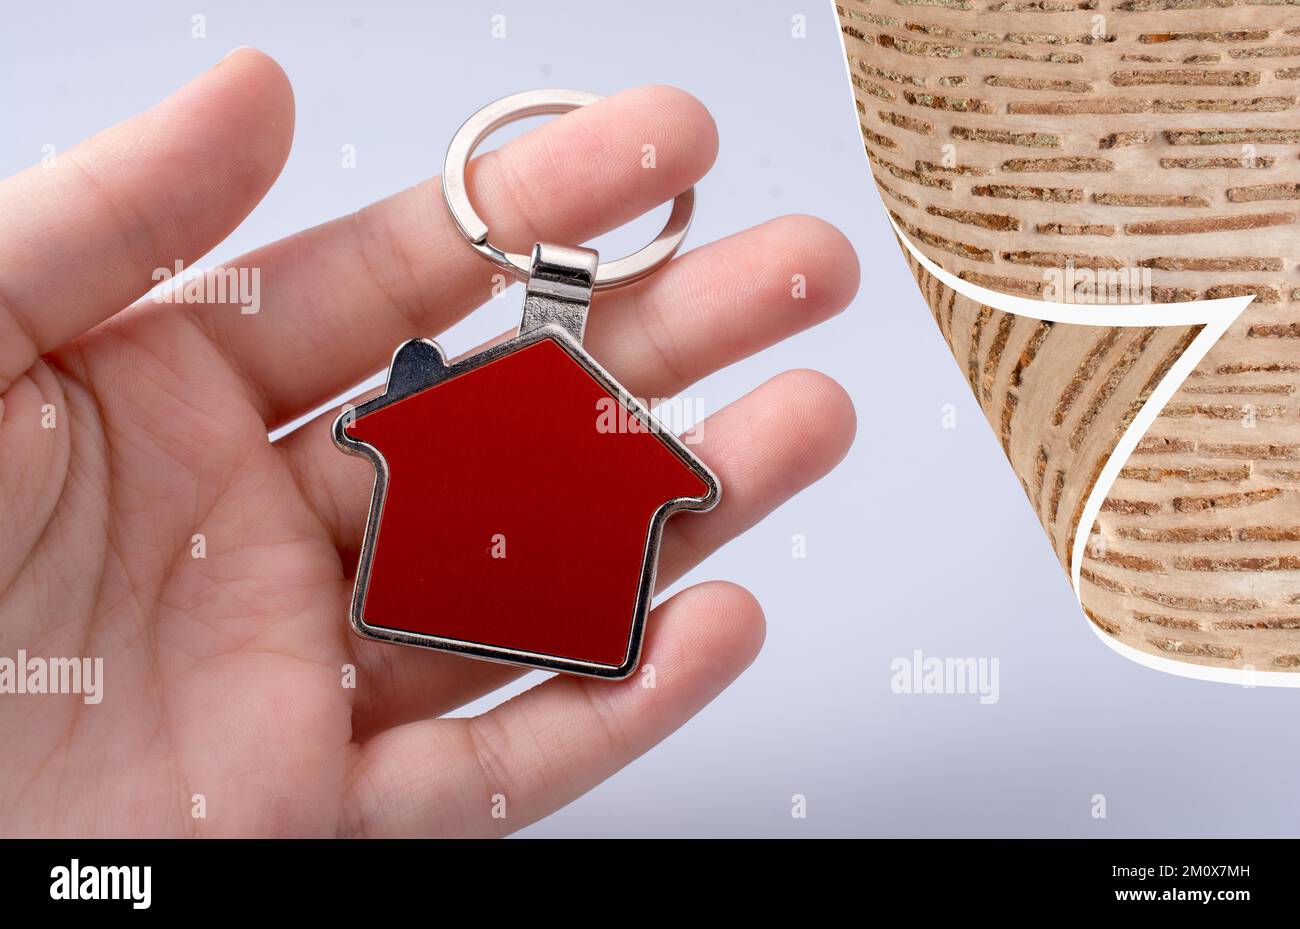 Hand holding a house icon in hand on a background Stock Photo